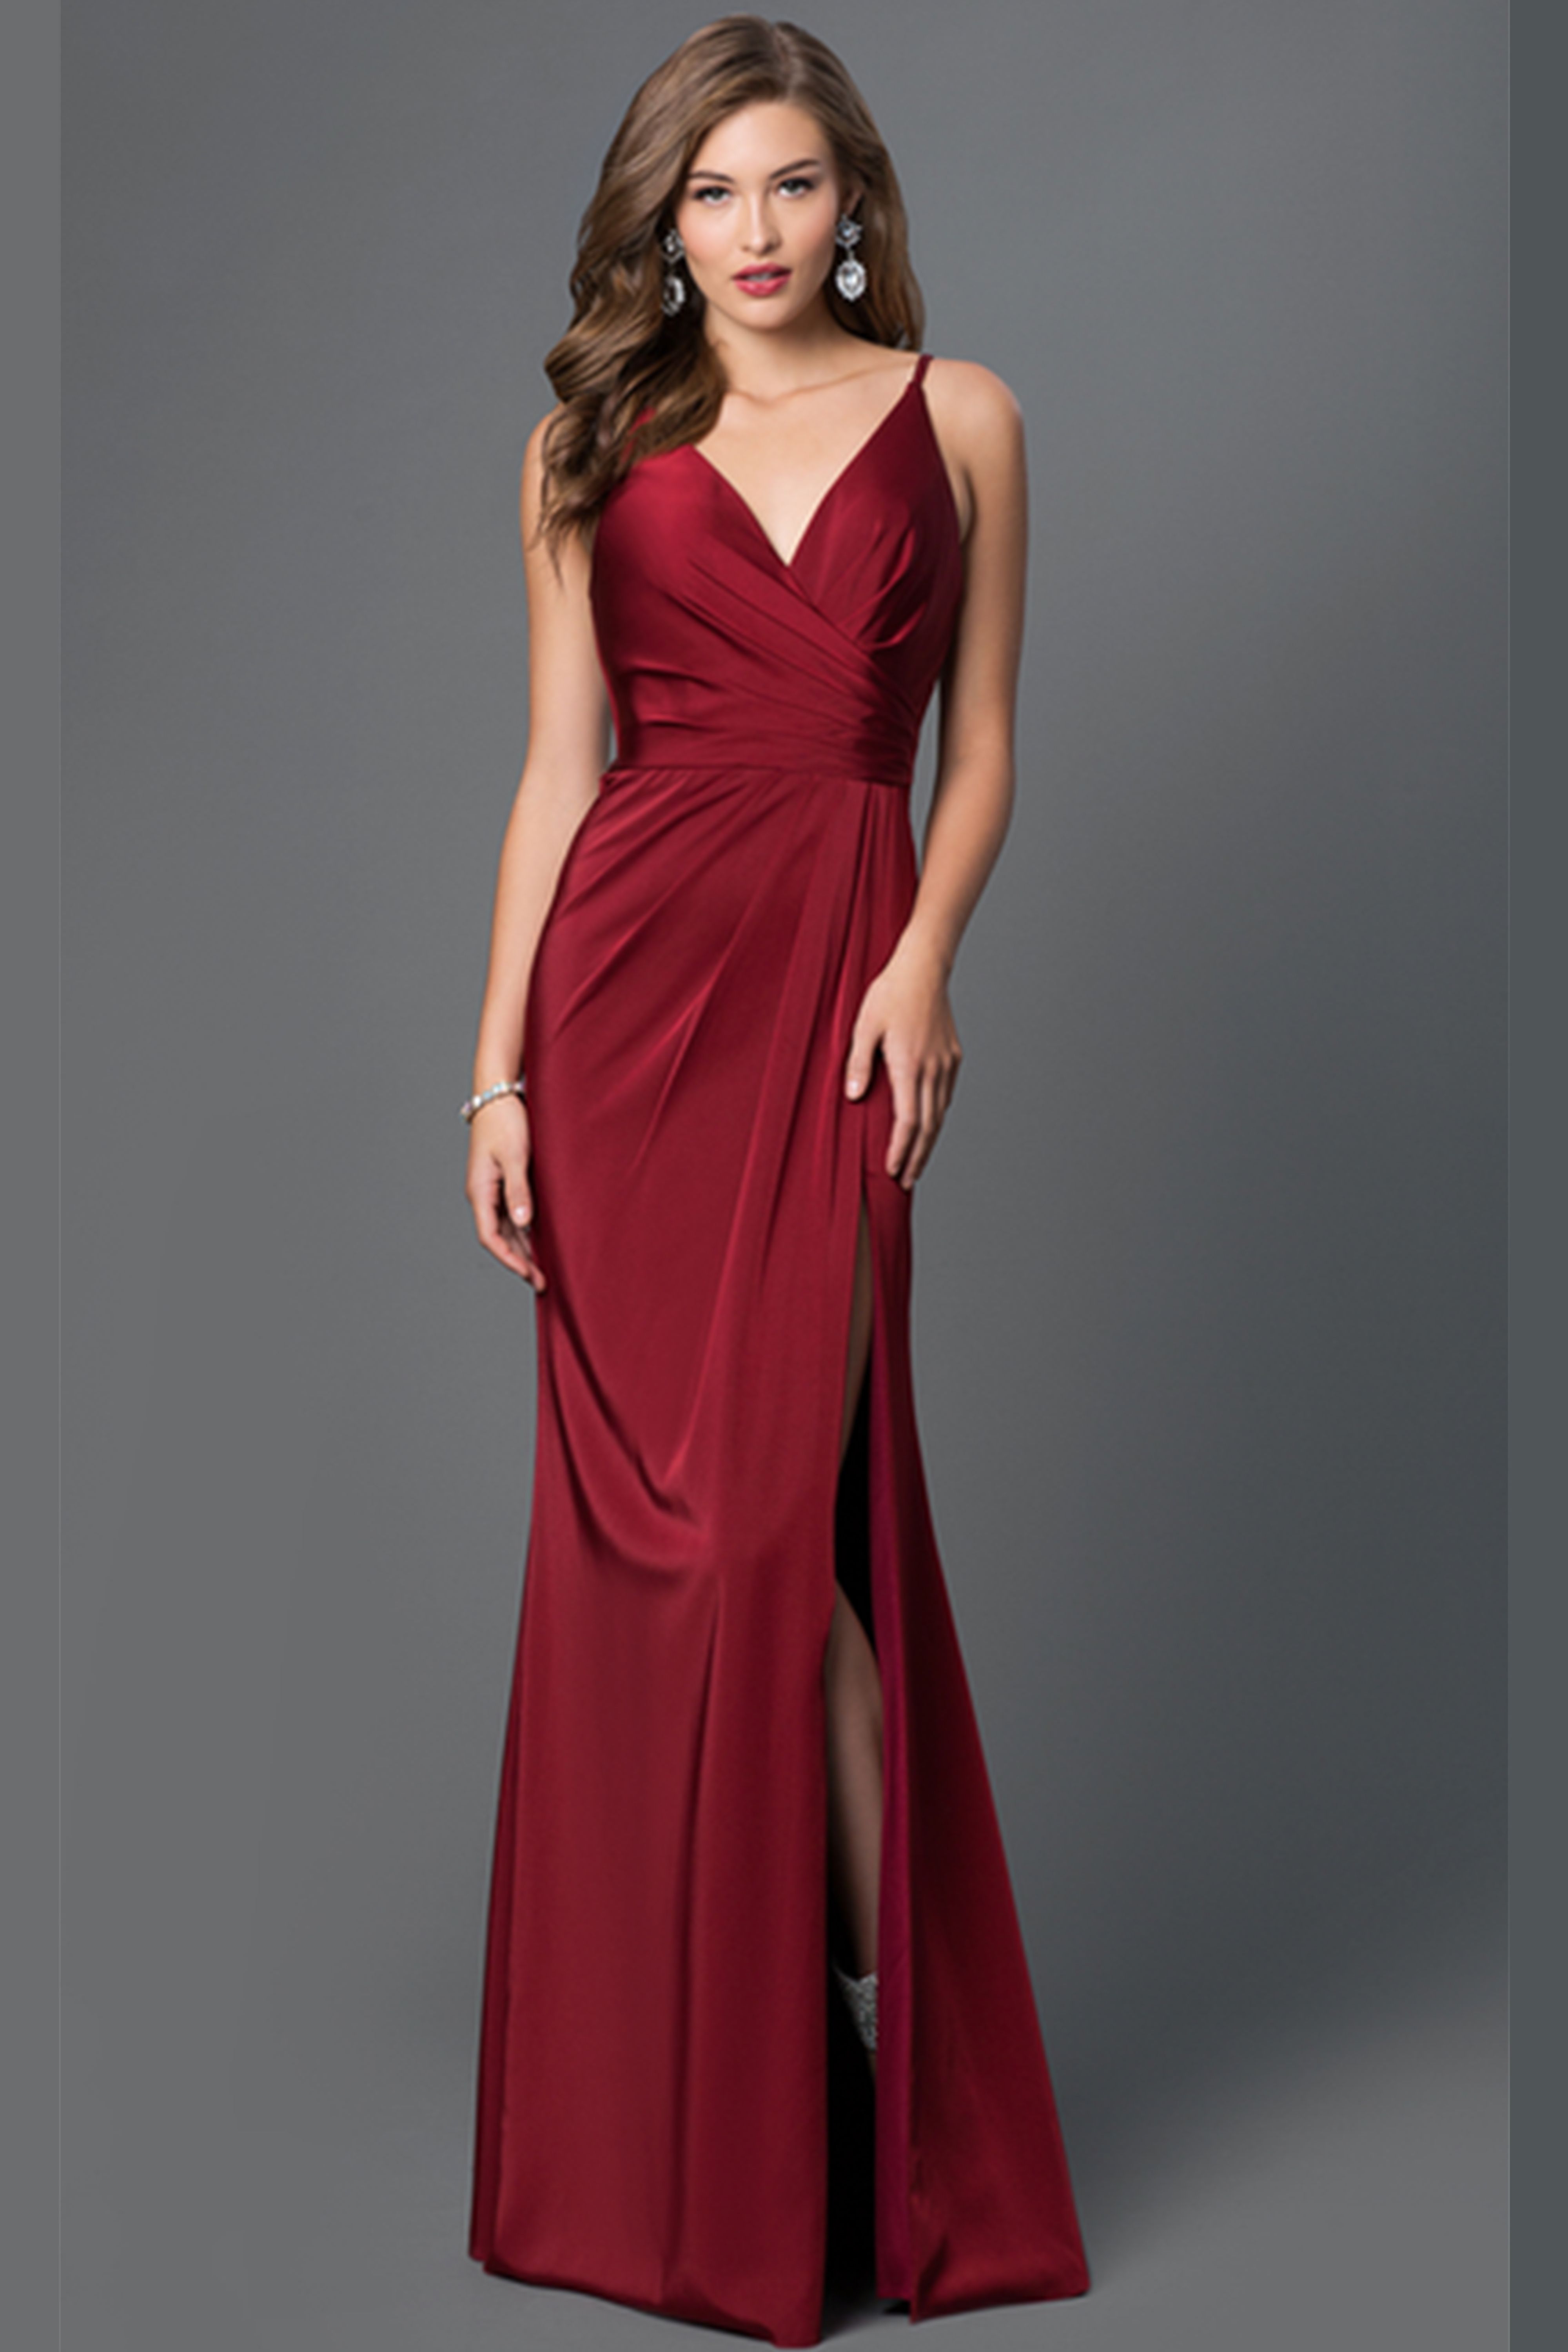 Prom Dresses in Red – Fashion dresses